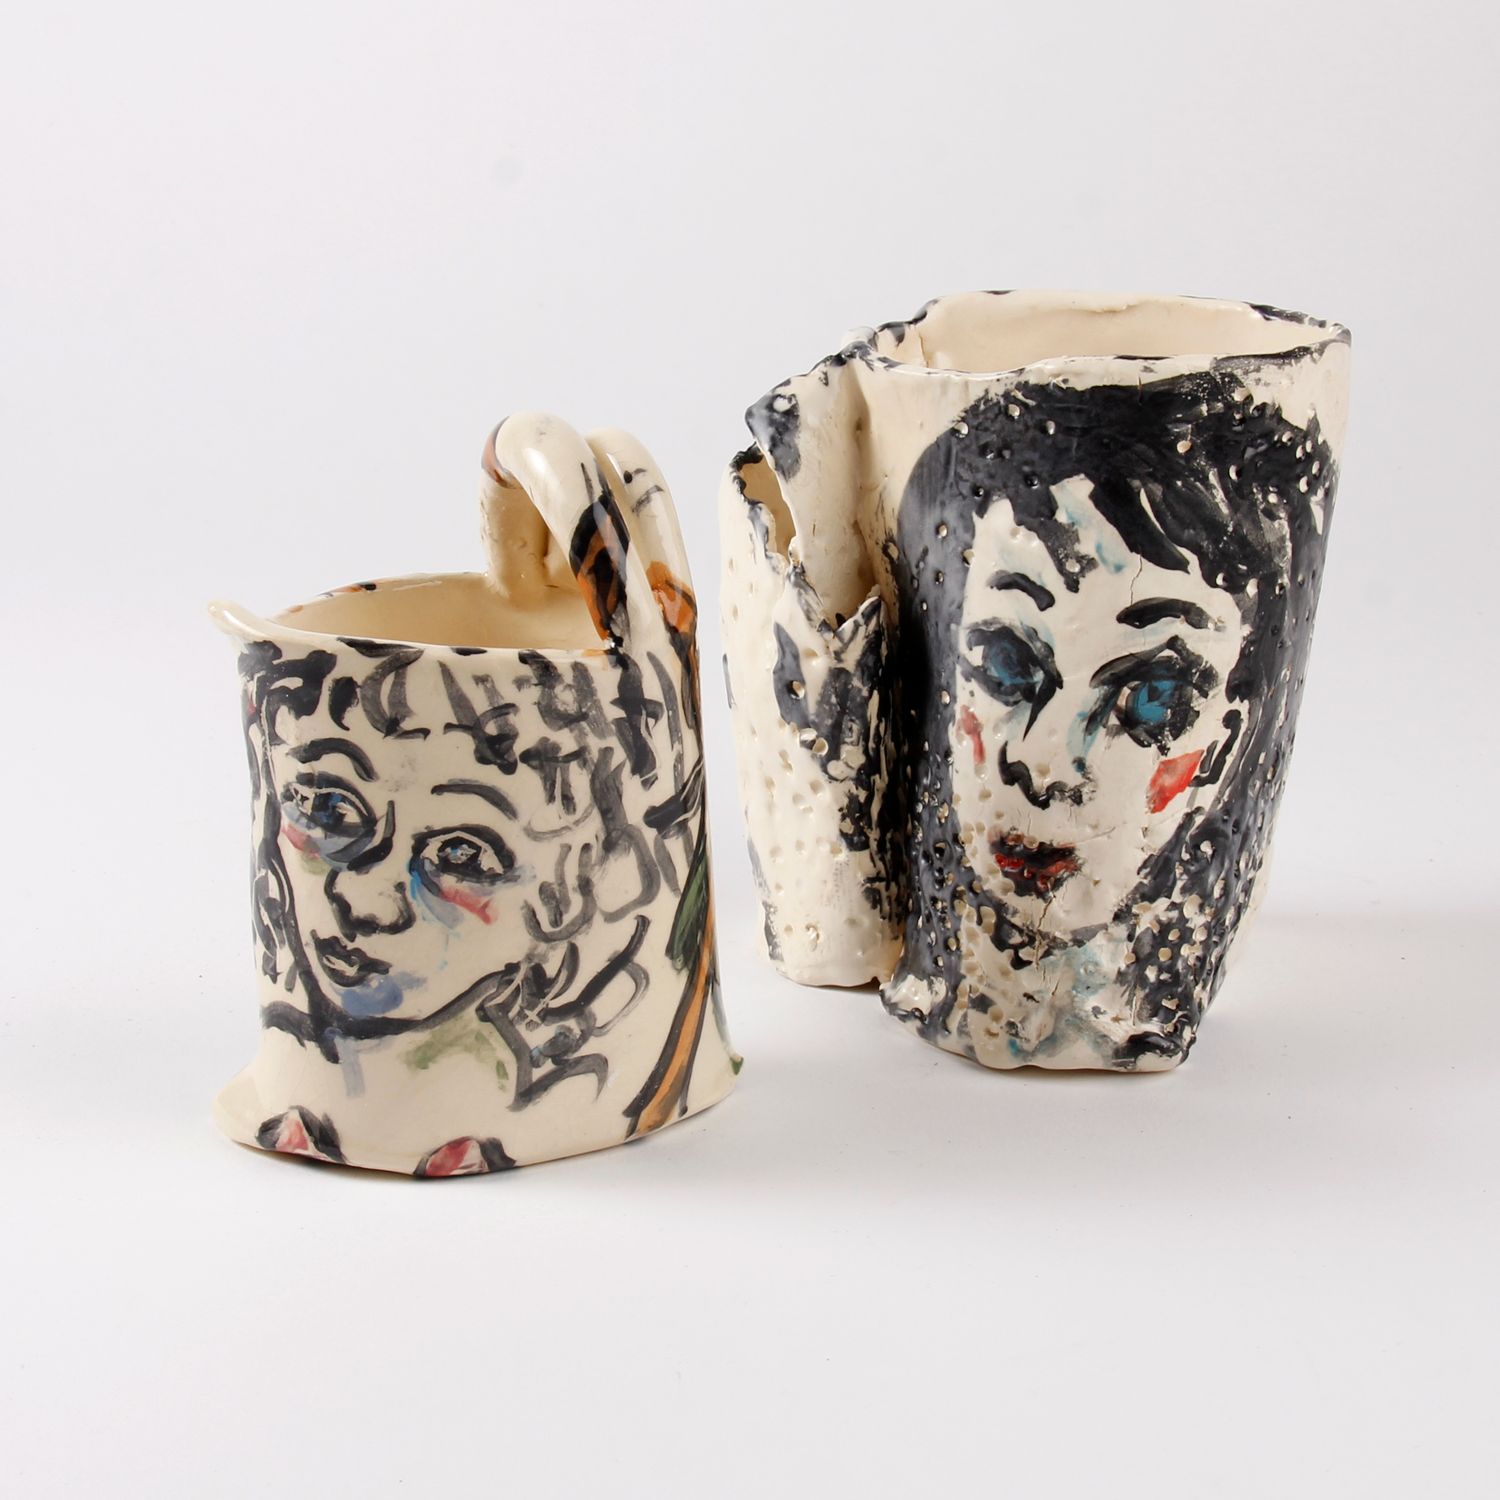 Patricia Lazar: Planter with Two Faces Product Image 2 of 3